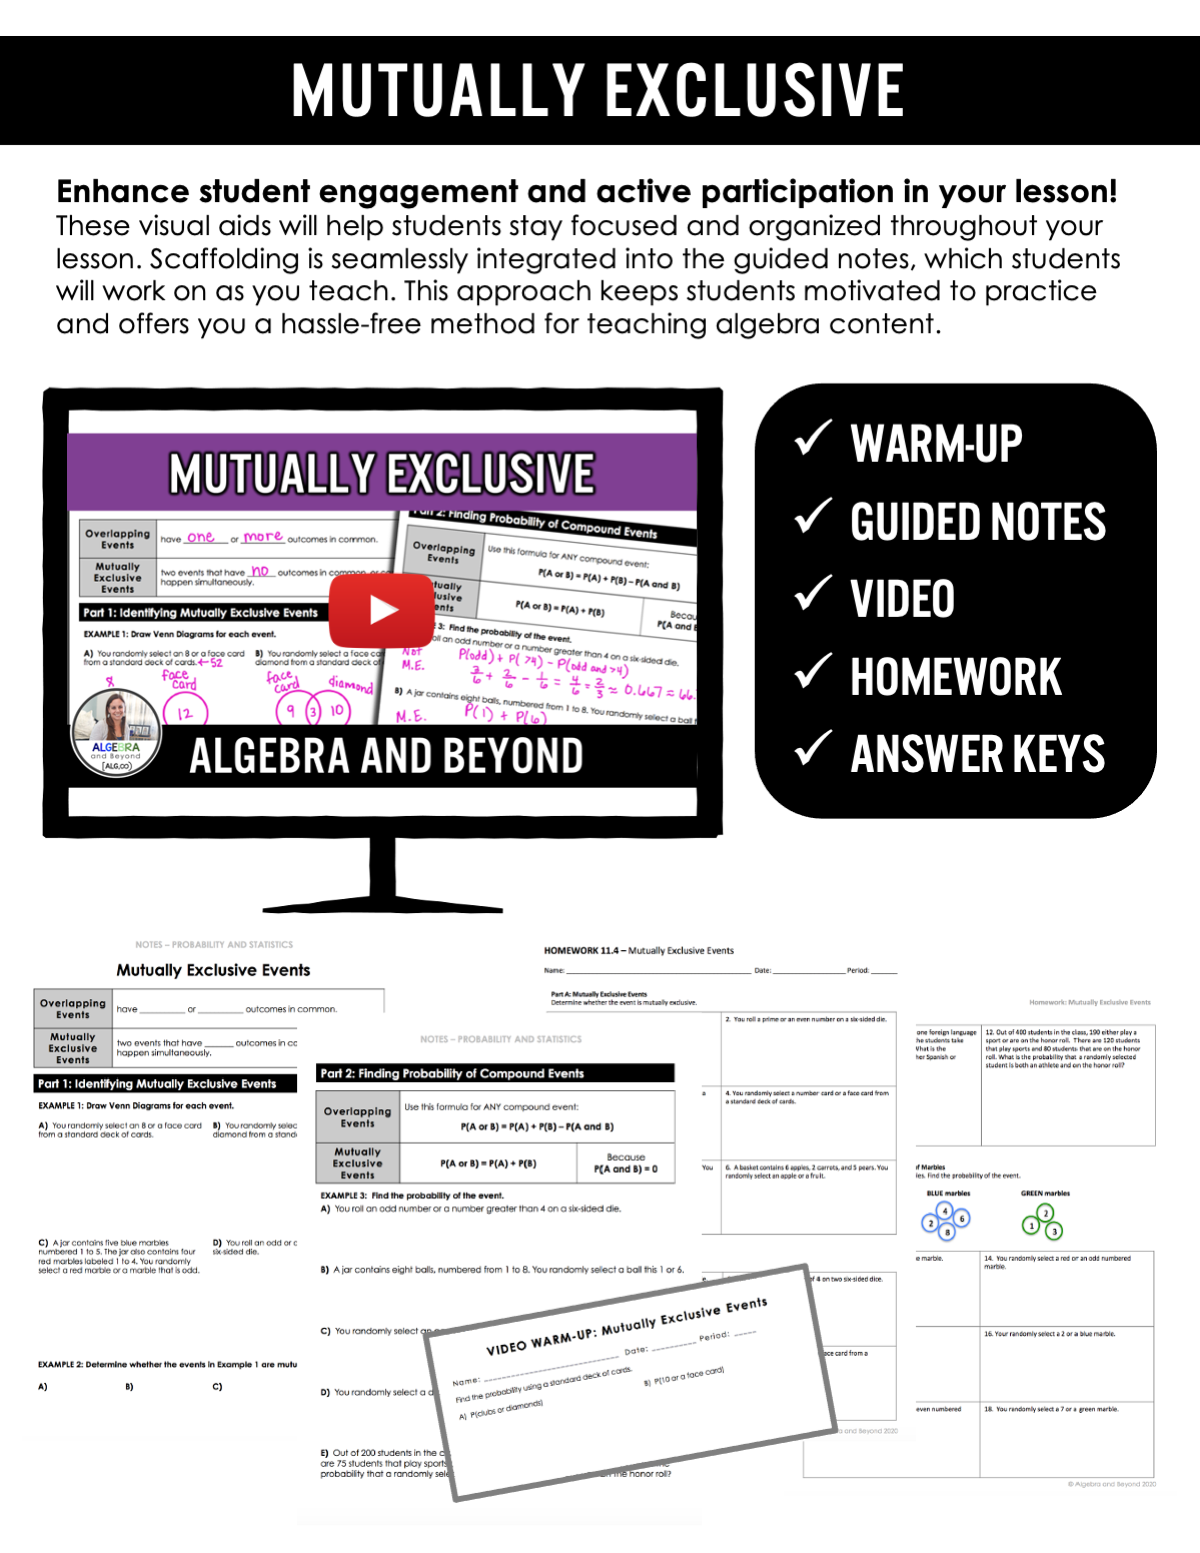 Mutually Exclusive Lesson | Video | Guided Notes | Homework